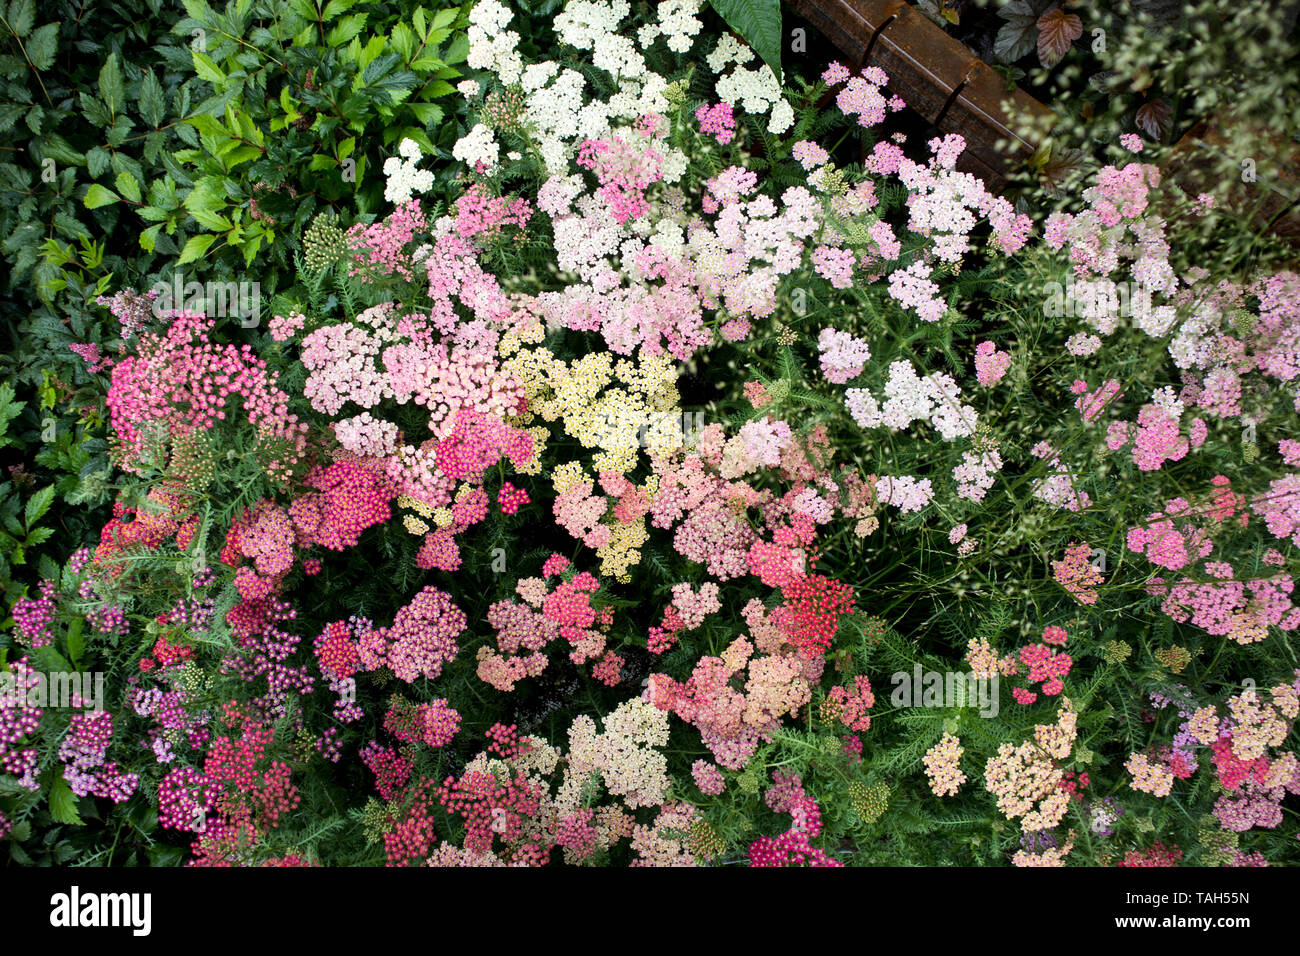 Multicolored sedum in a flowerbed as a decoration Stock Photo